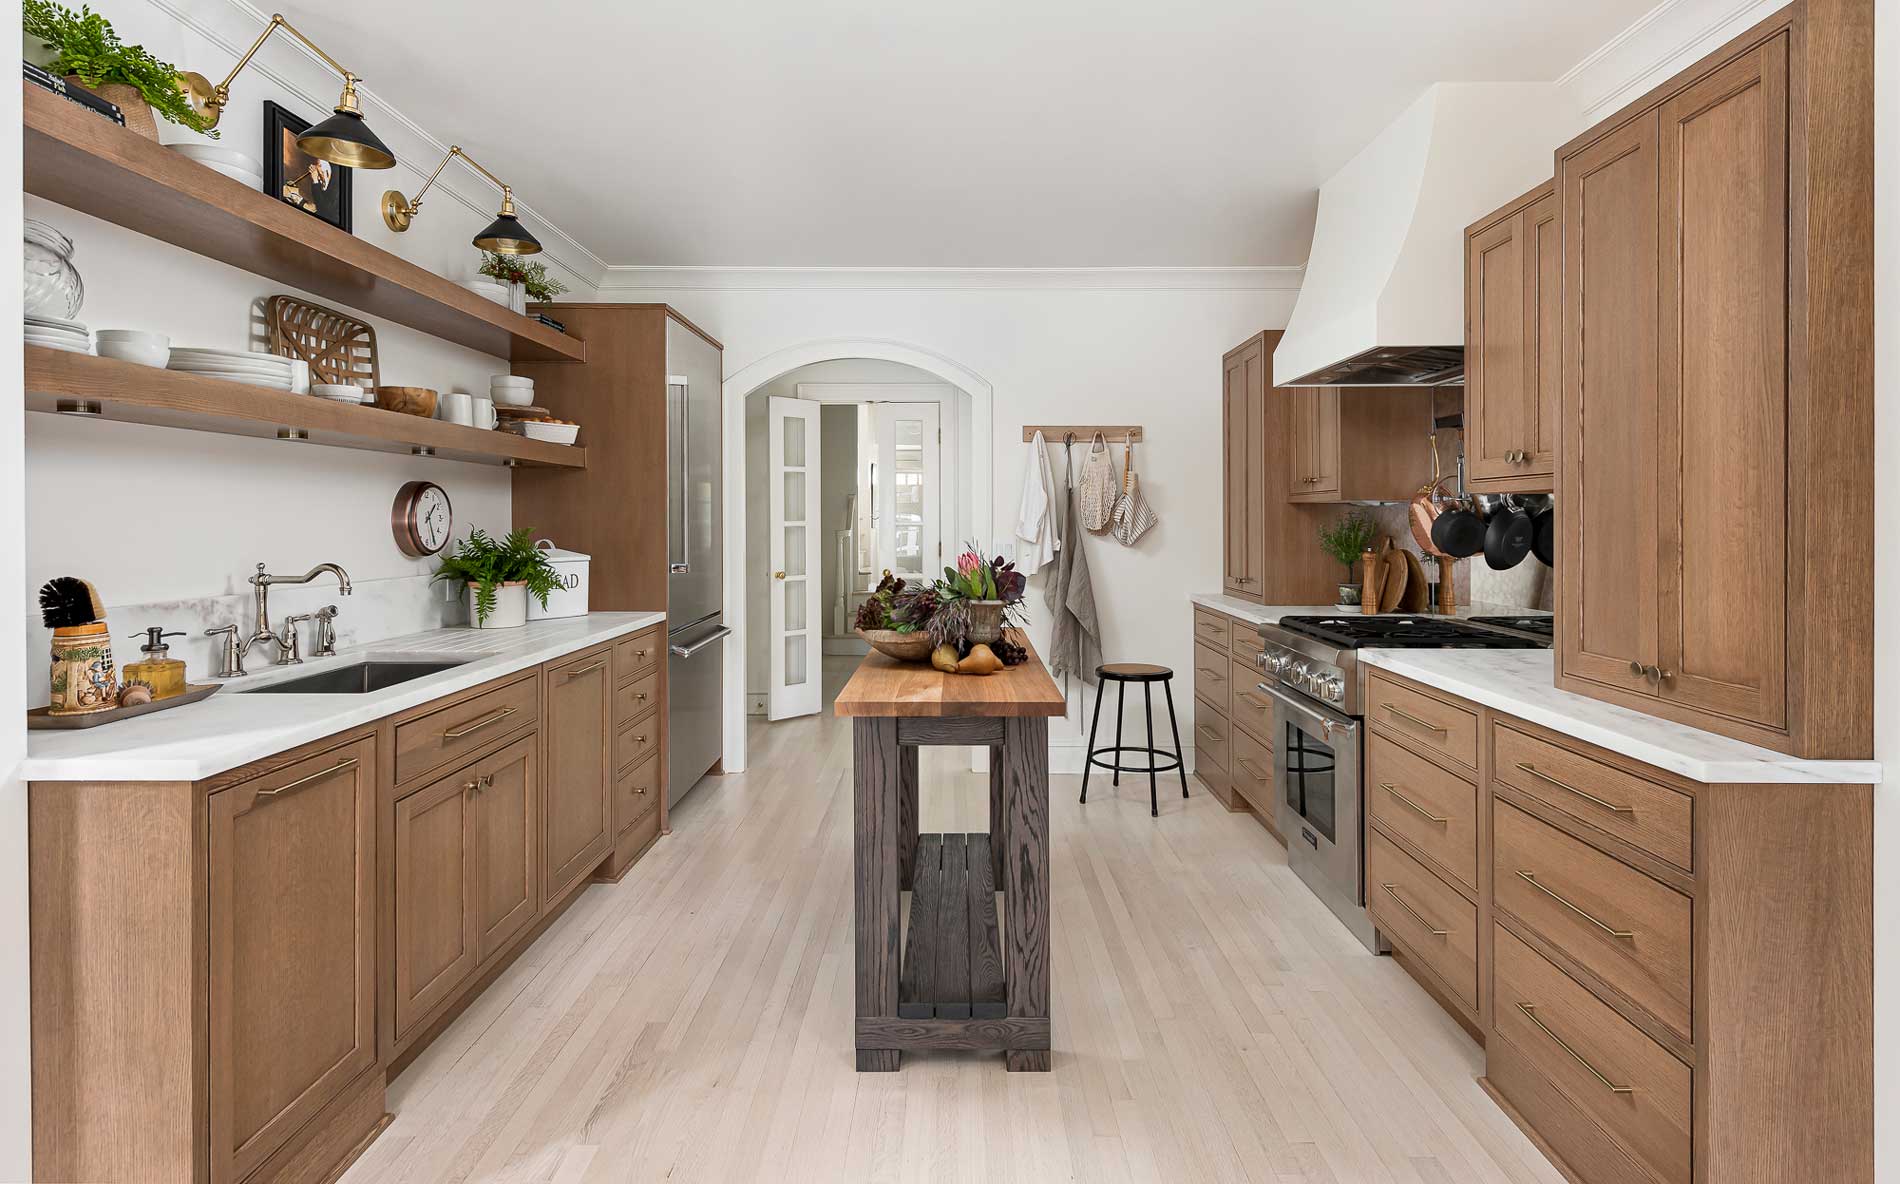 A Danish styled kitchen with inset cabinets in a light stained oak and a tiny kitchen island featuring hidden panel-ready appliances.